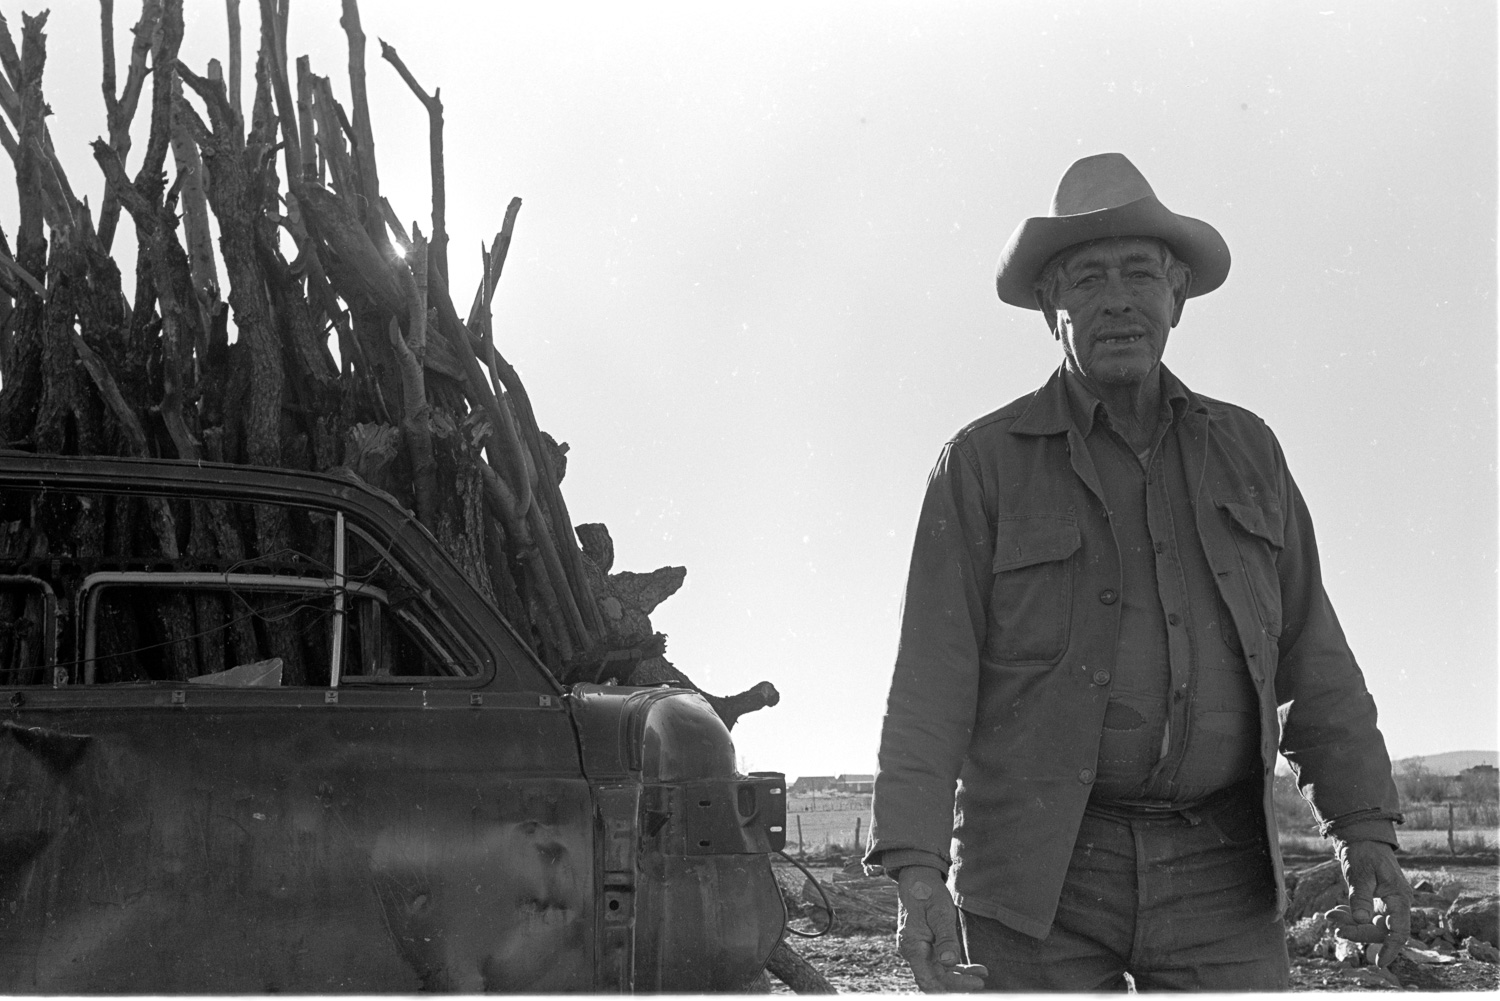  This farmer's face is as weather-beaten as the car door leaning against the stack of firewood. 